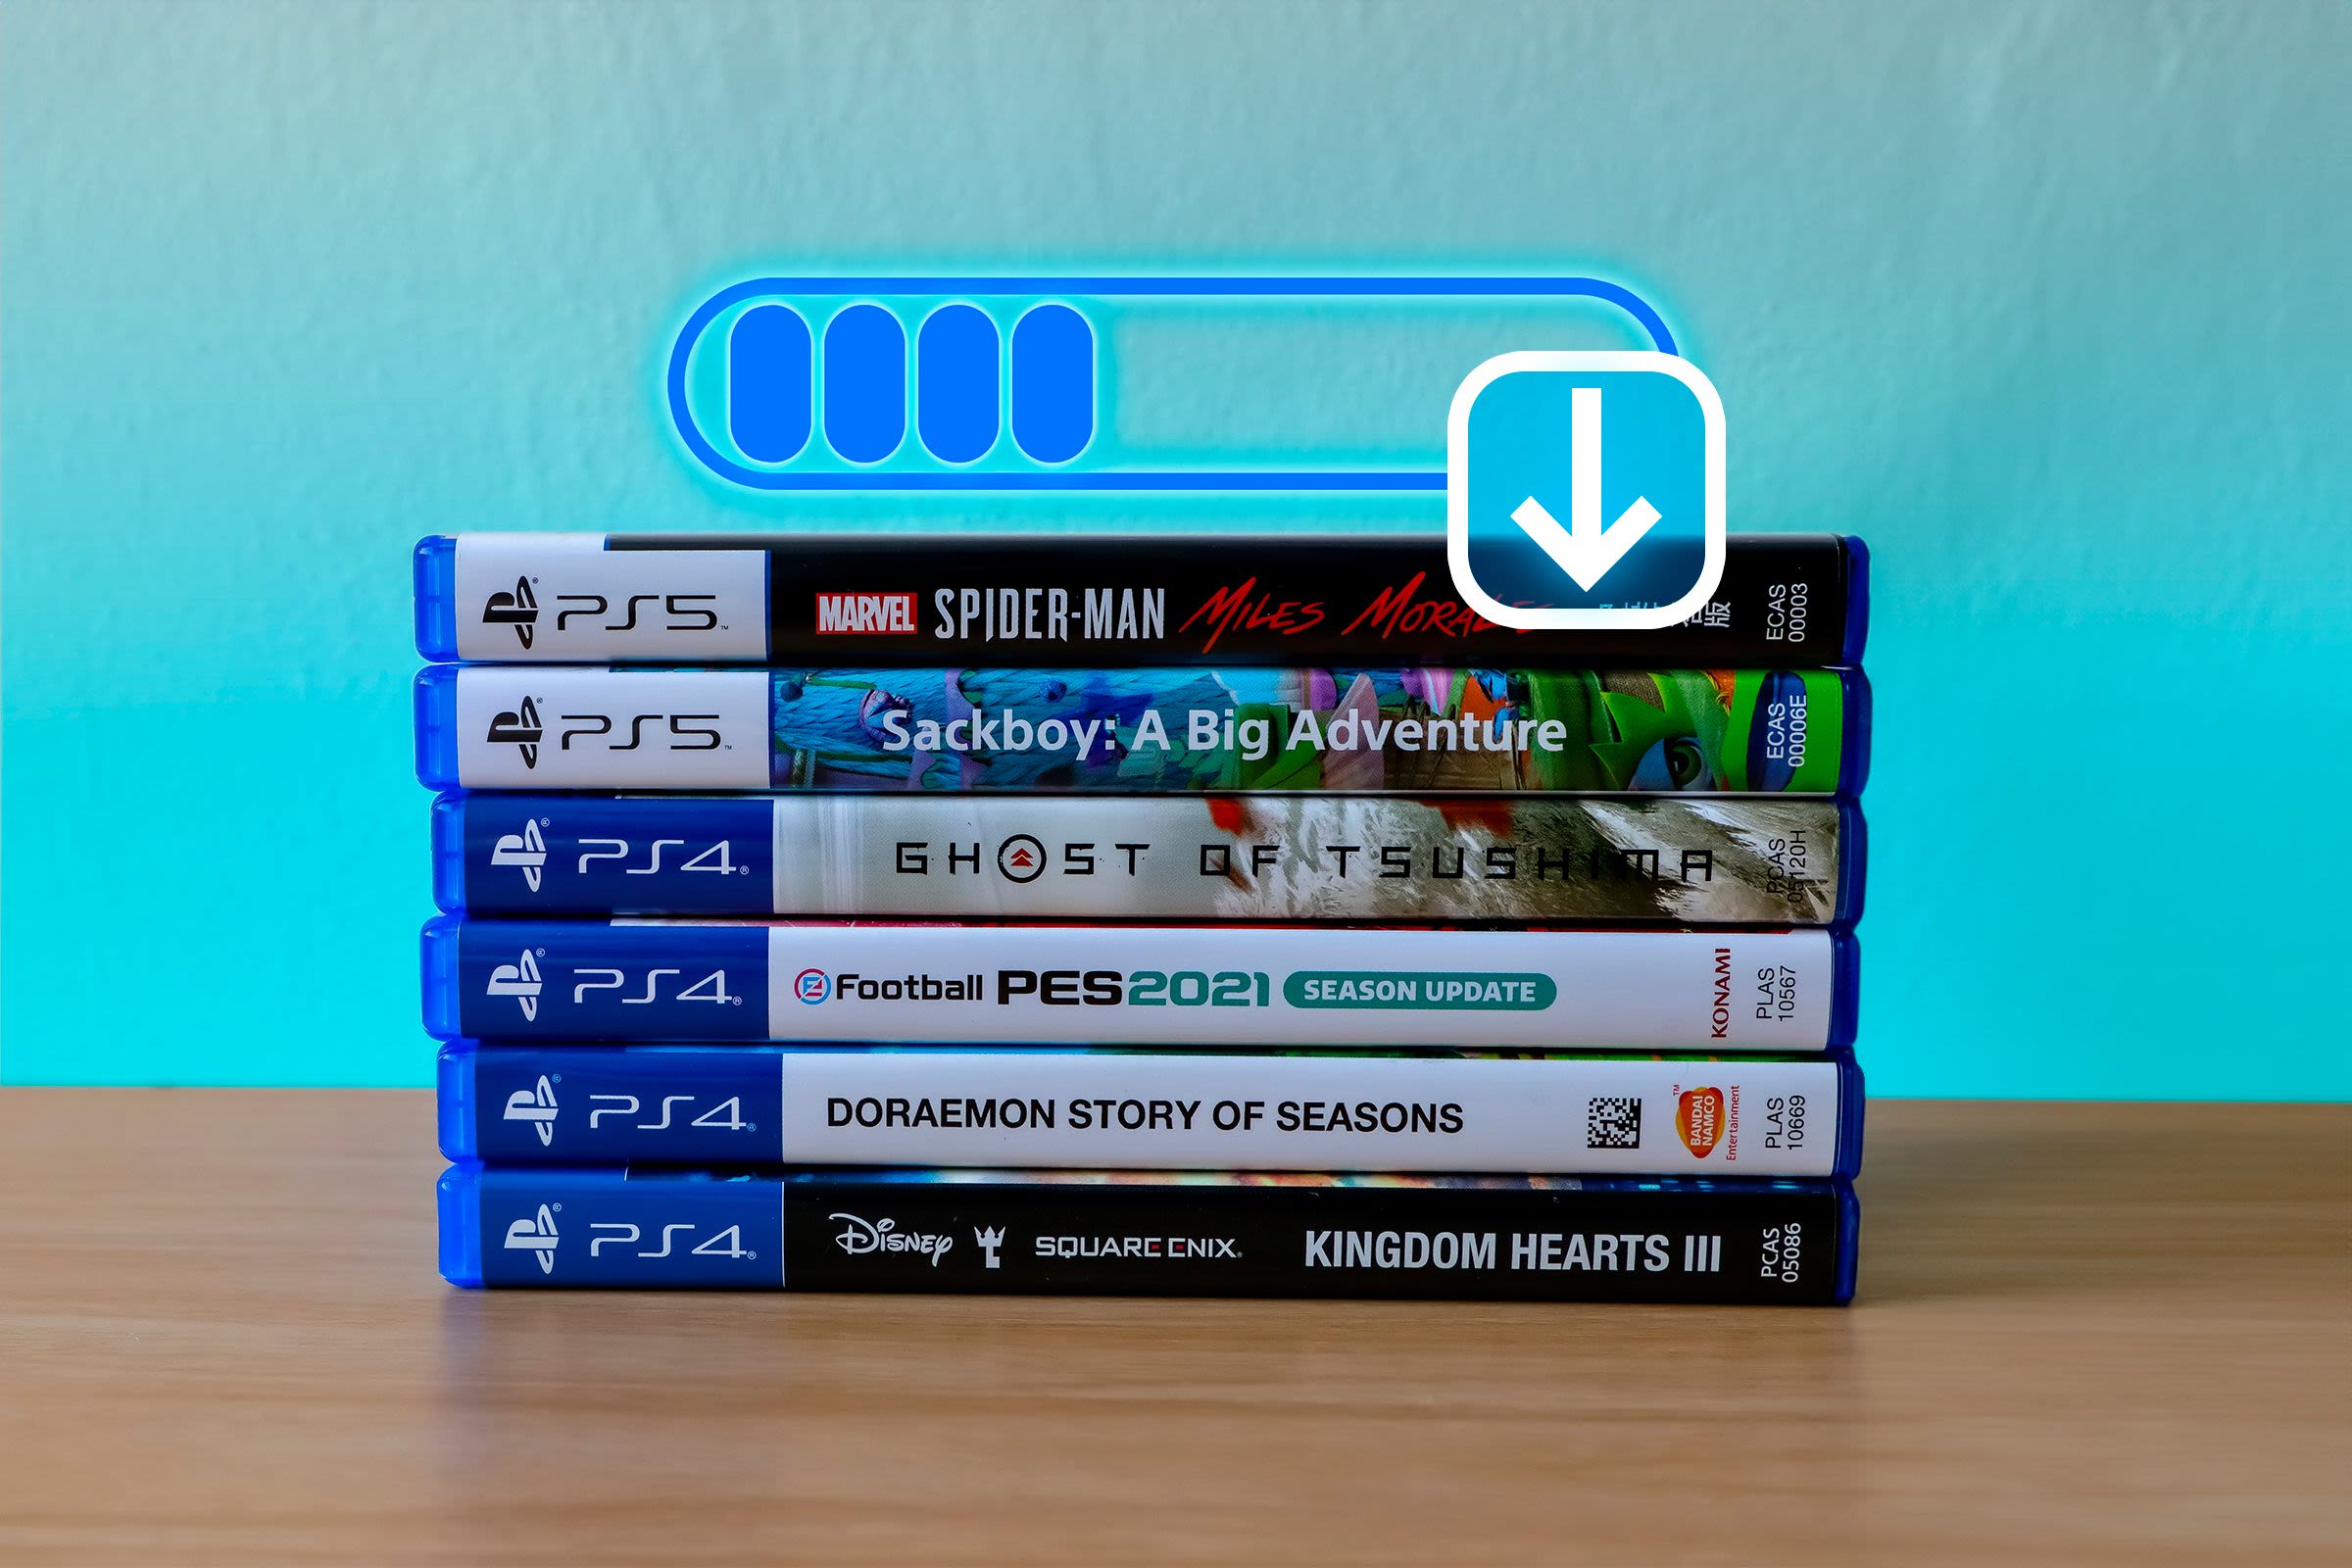 Why Do Physical Games Still Need Installations and Downloads?